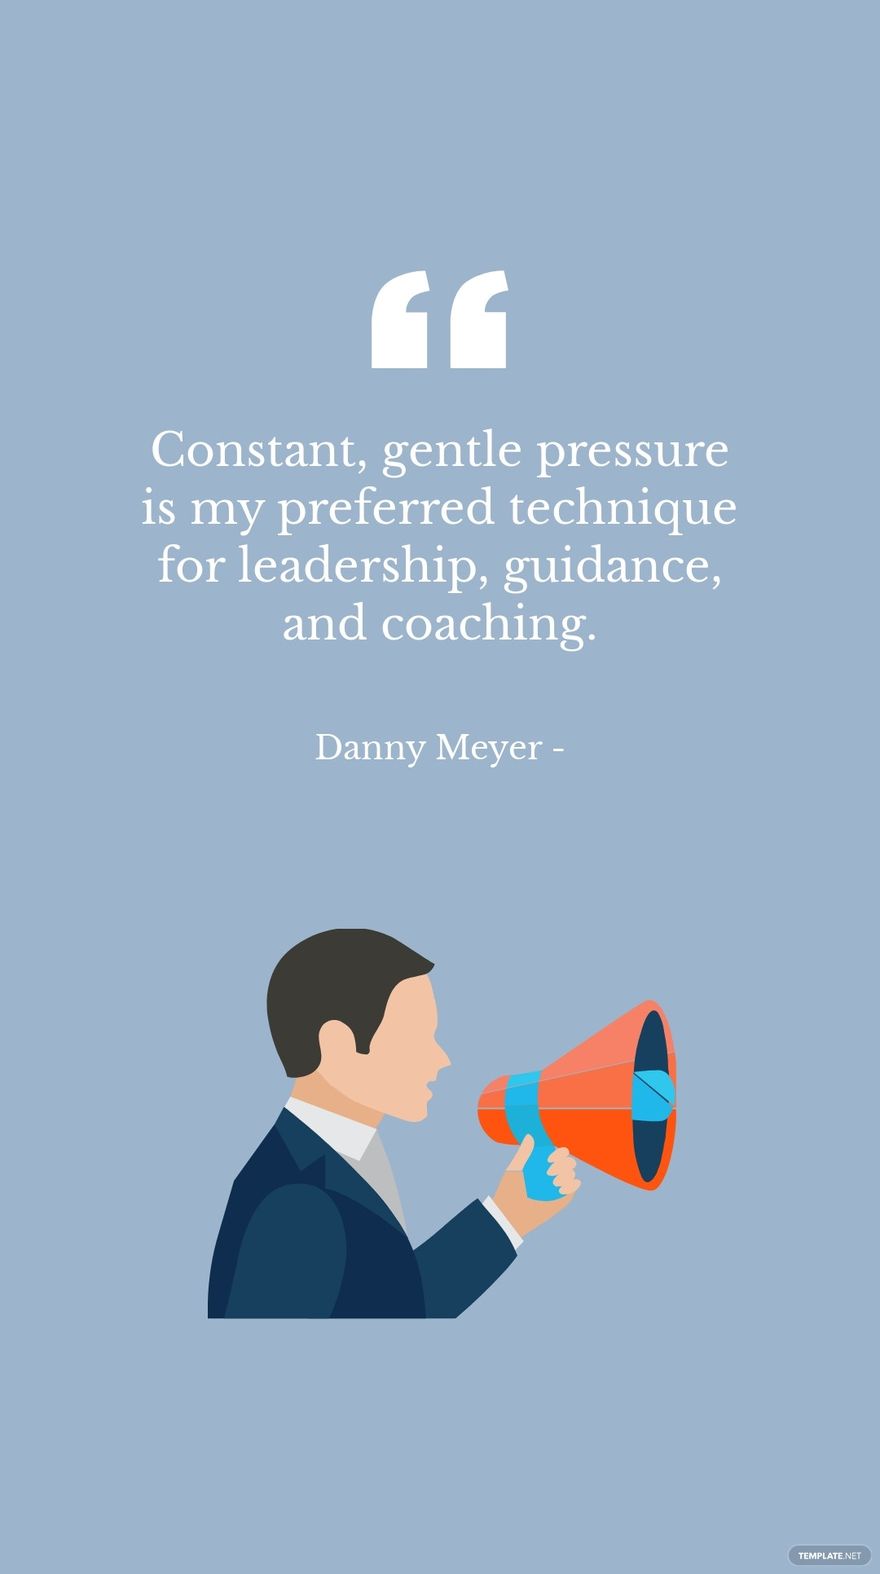 Danny Meyer - Constant, gentle pressure is my preferred technique for leadership, guidance, and coaching.